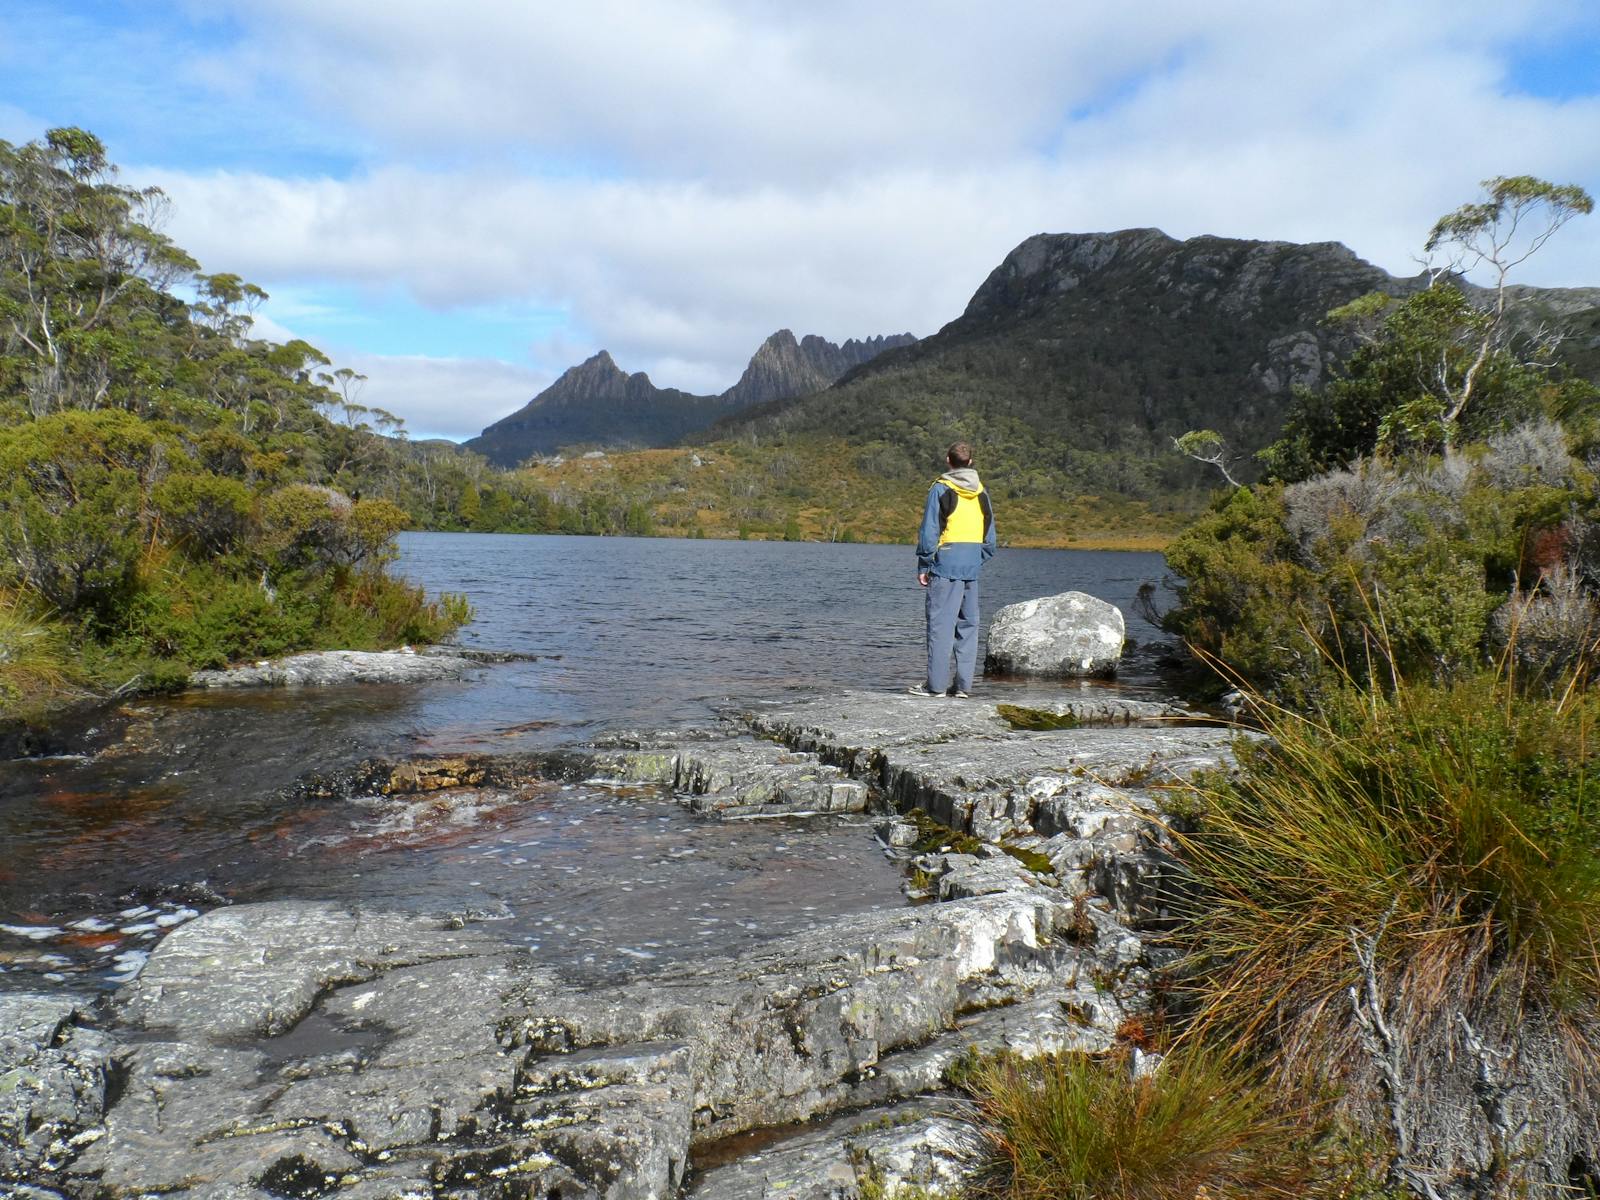 One of the many glacial lakes in the Cradle Mountain National Park